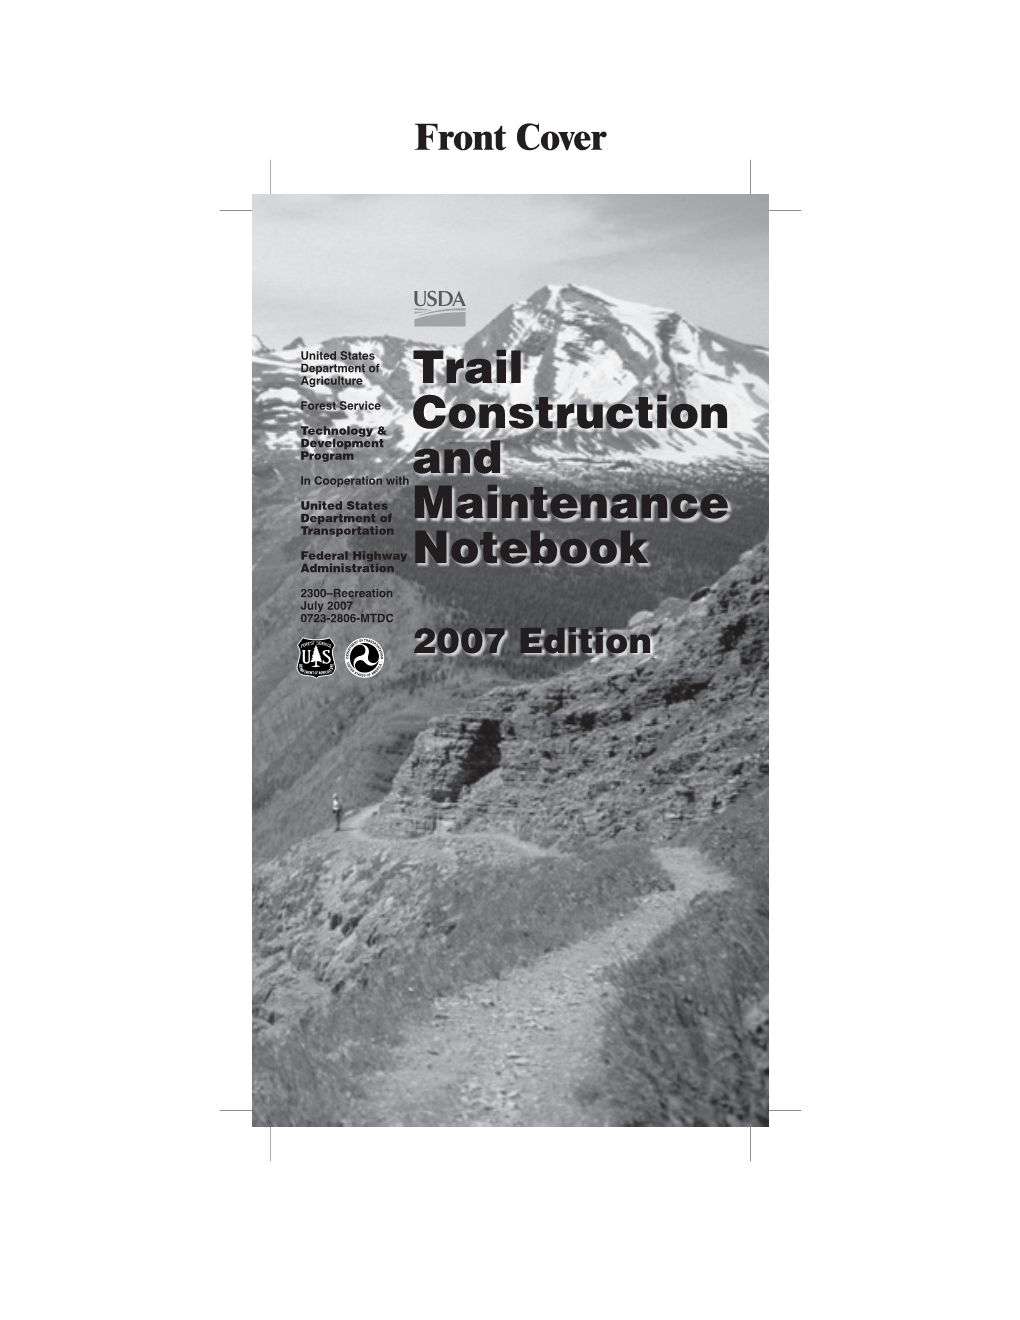 Trail Construction and Maintenance Notebook: 2007 Edition